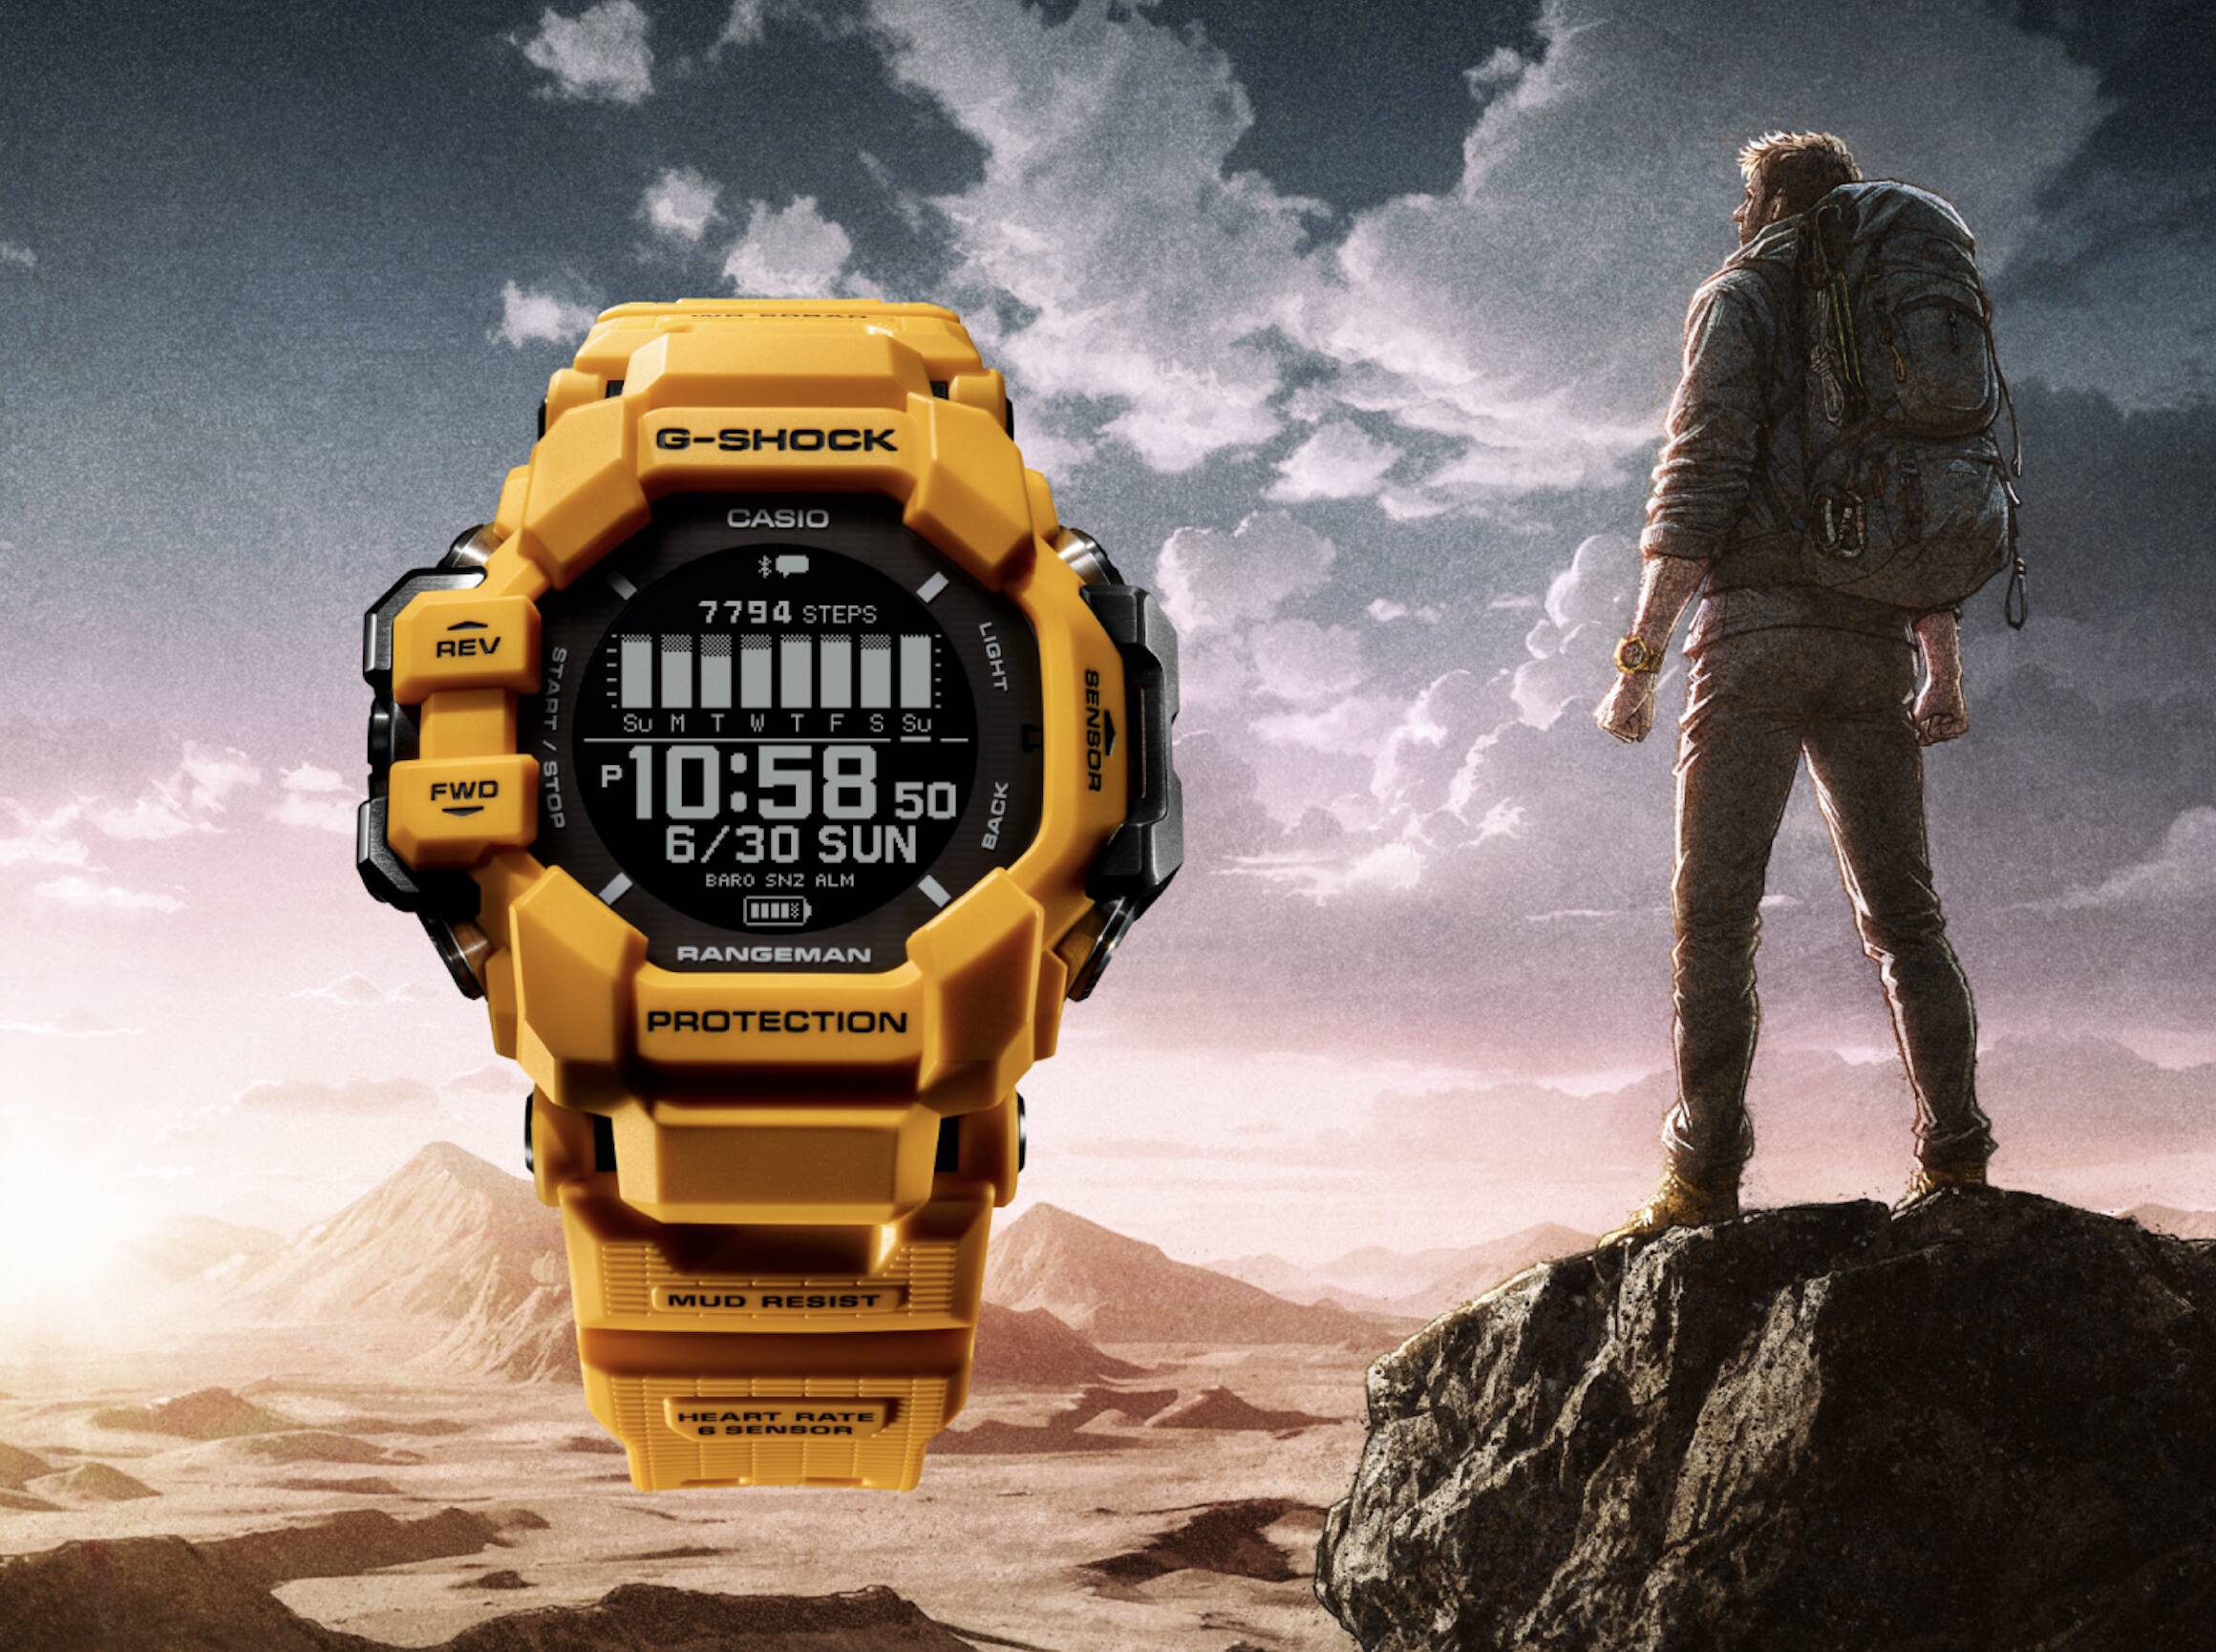 CASIO TO RELEASE G-SHOCK DESIGNED TO SURVIVAL SPECS